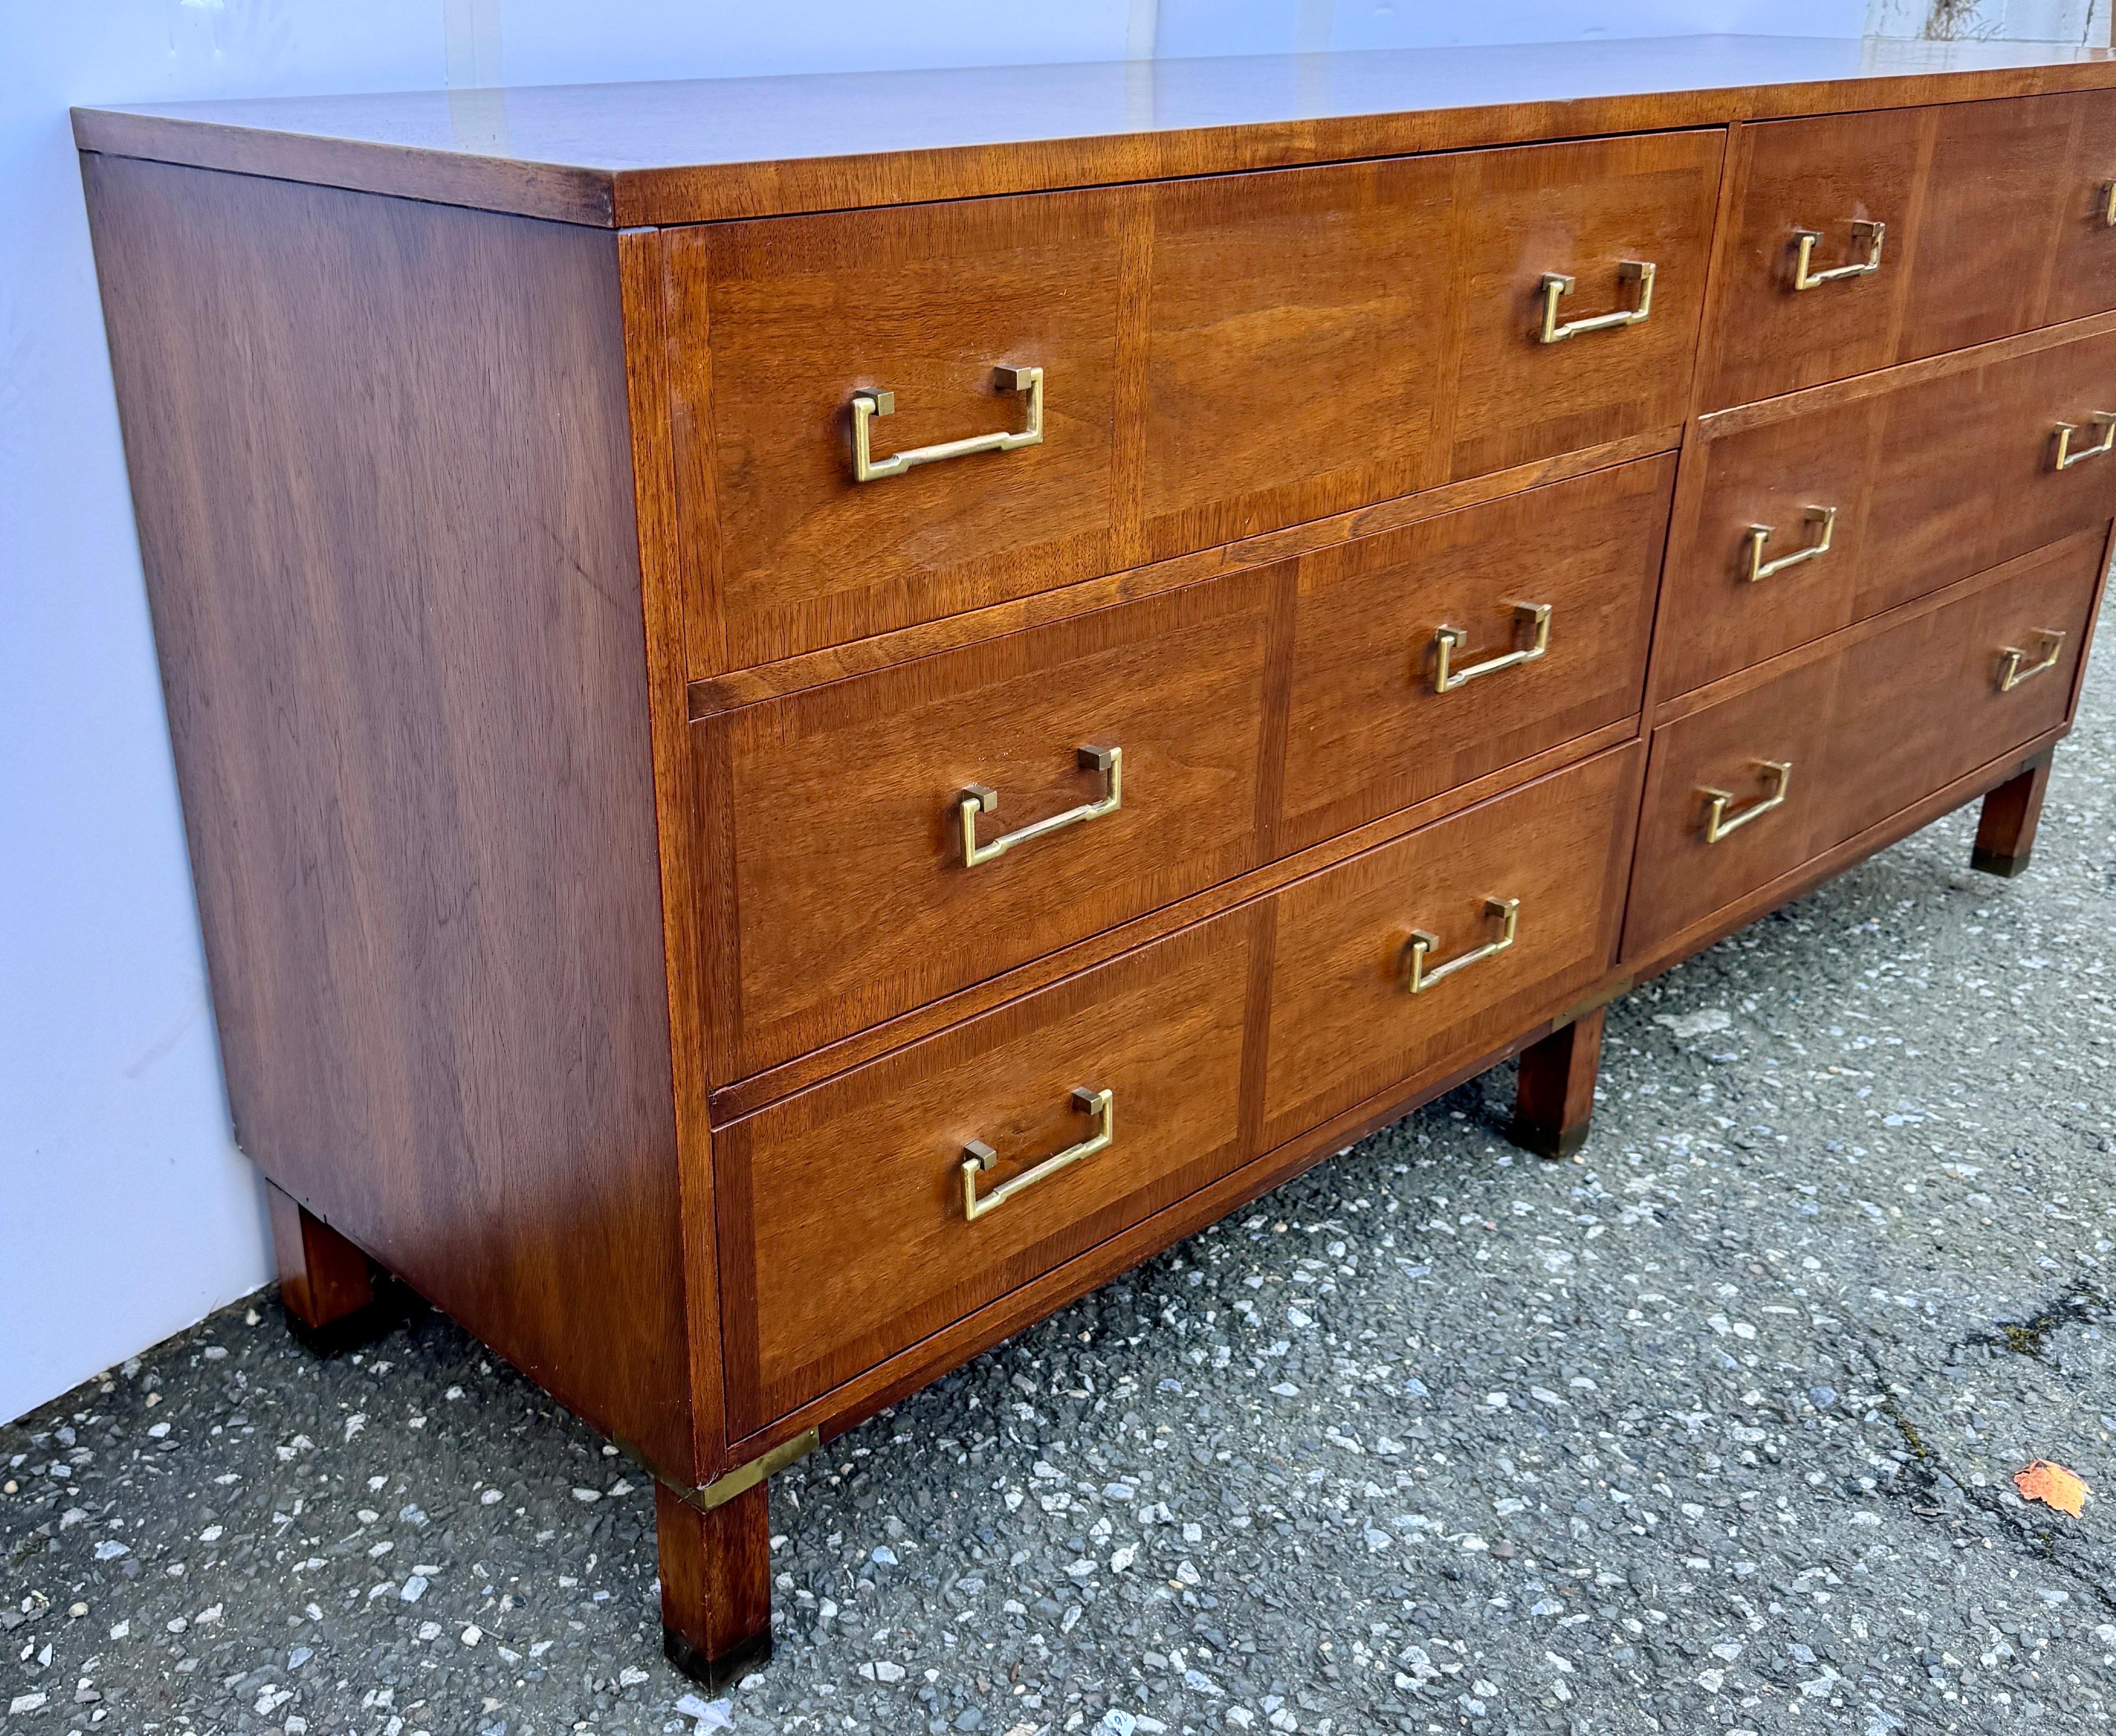 Hand-Crafted Mid-Century Modern Campaign Six Drawer Dresser by Sligh Furniture